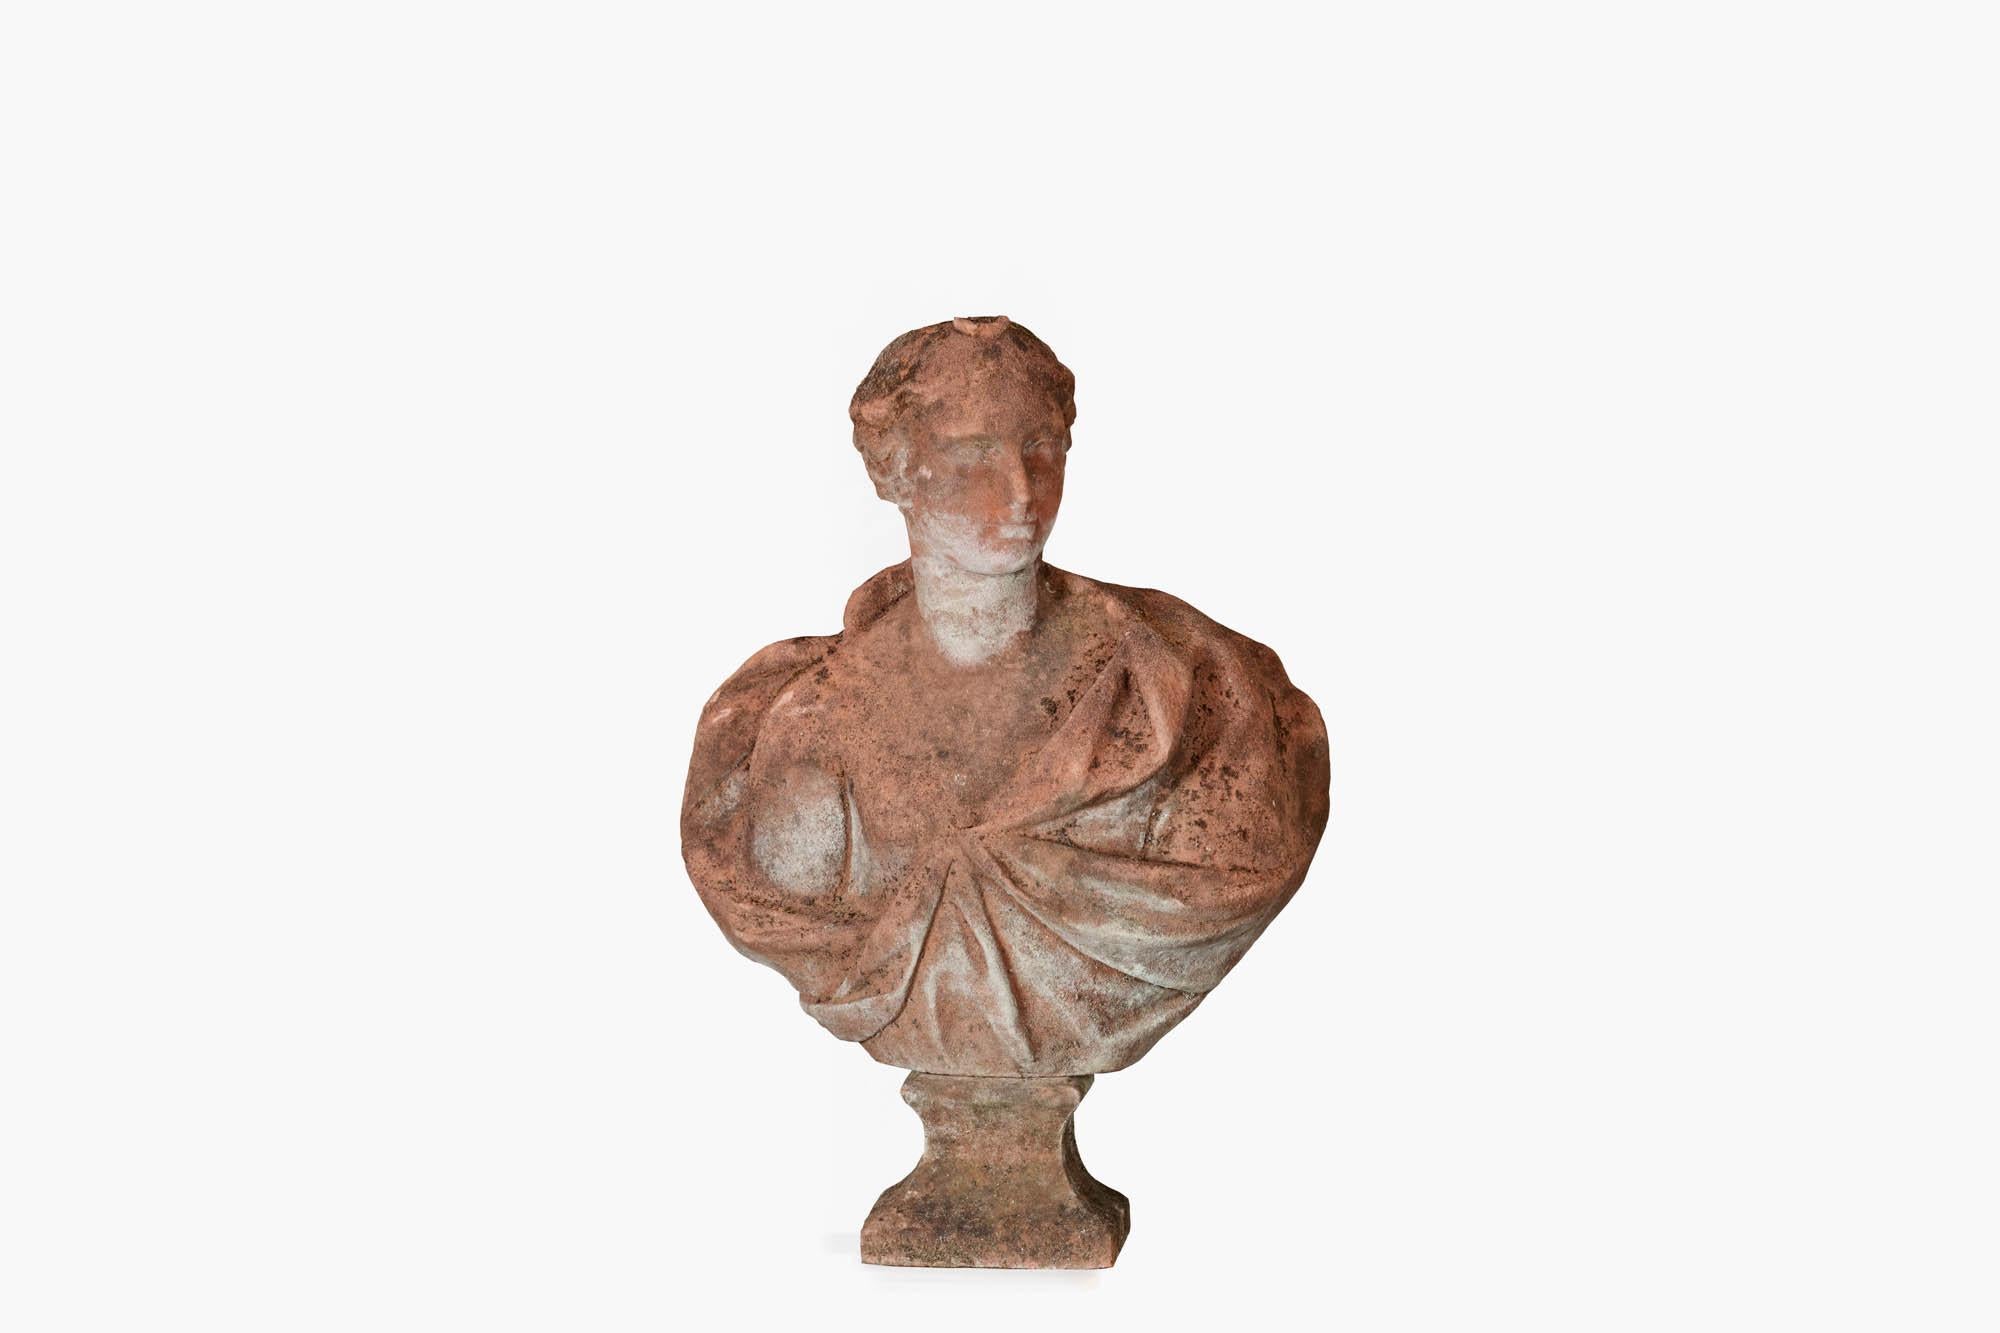 Late 18th century neo-classical style hand-carved sandstone bust of a lady in classical Greco-Roman dress. Possibly a depiction of Daphne who was a Naiad nymph in Greek mythology; naiads were minor goddesses associated with fountains, wells,